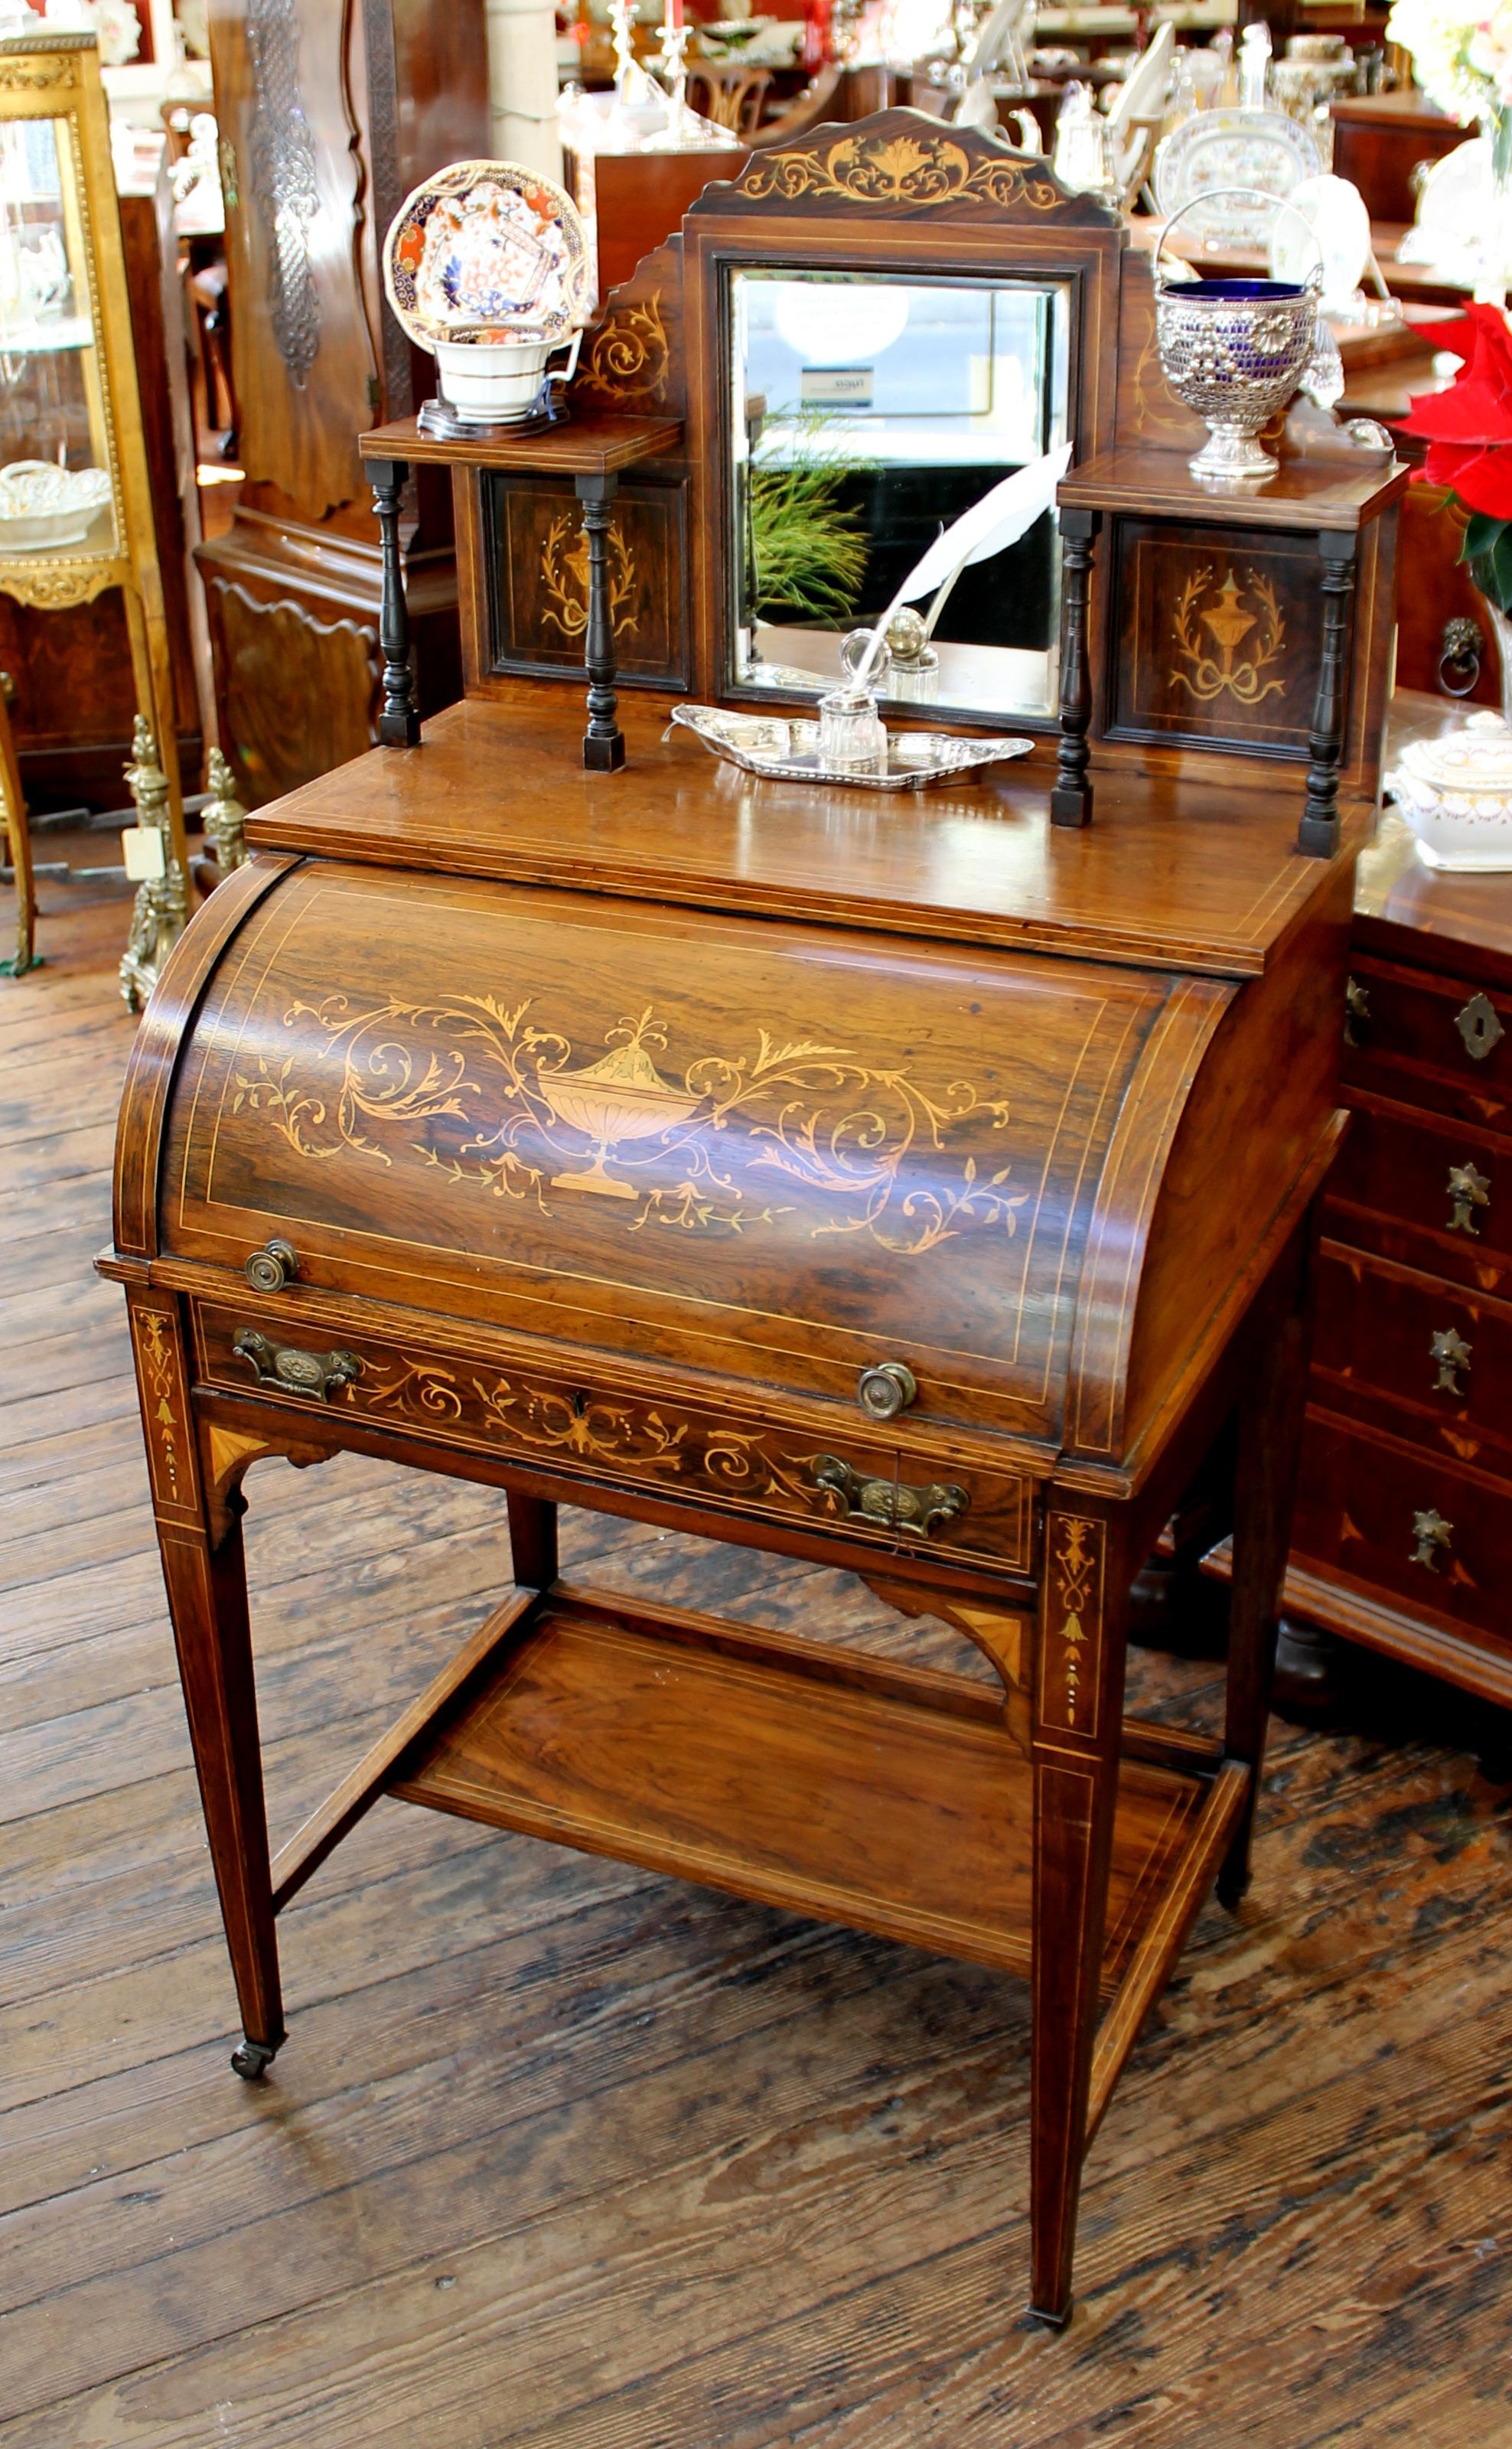 Fabulous quality antique English marquetry inlaid rosewood cylinder-top ladies writing desk with marvelous fitted interior including pigeon holes and a leathered writing slope which is ratcheted to stand at an angle for writing. There is also a